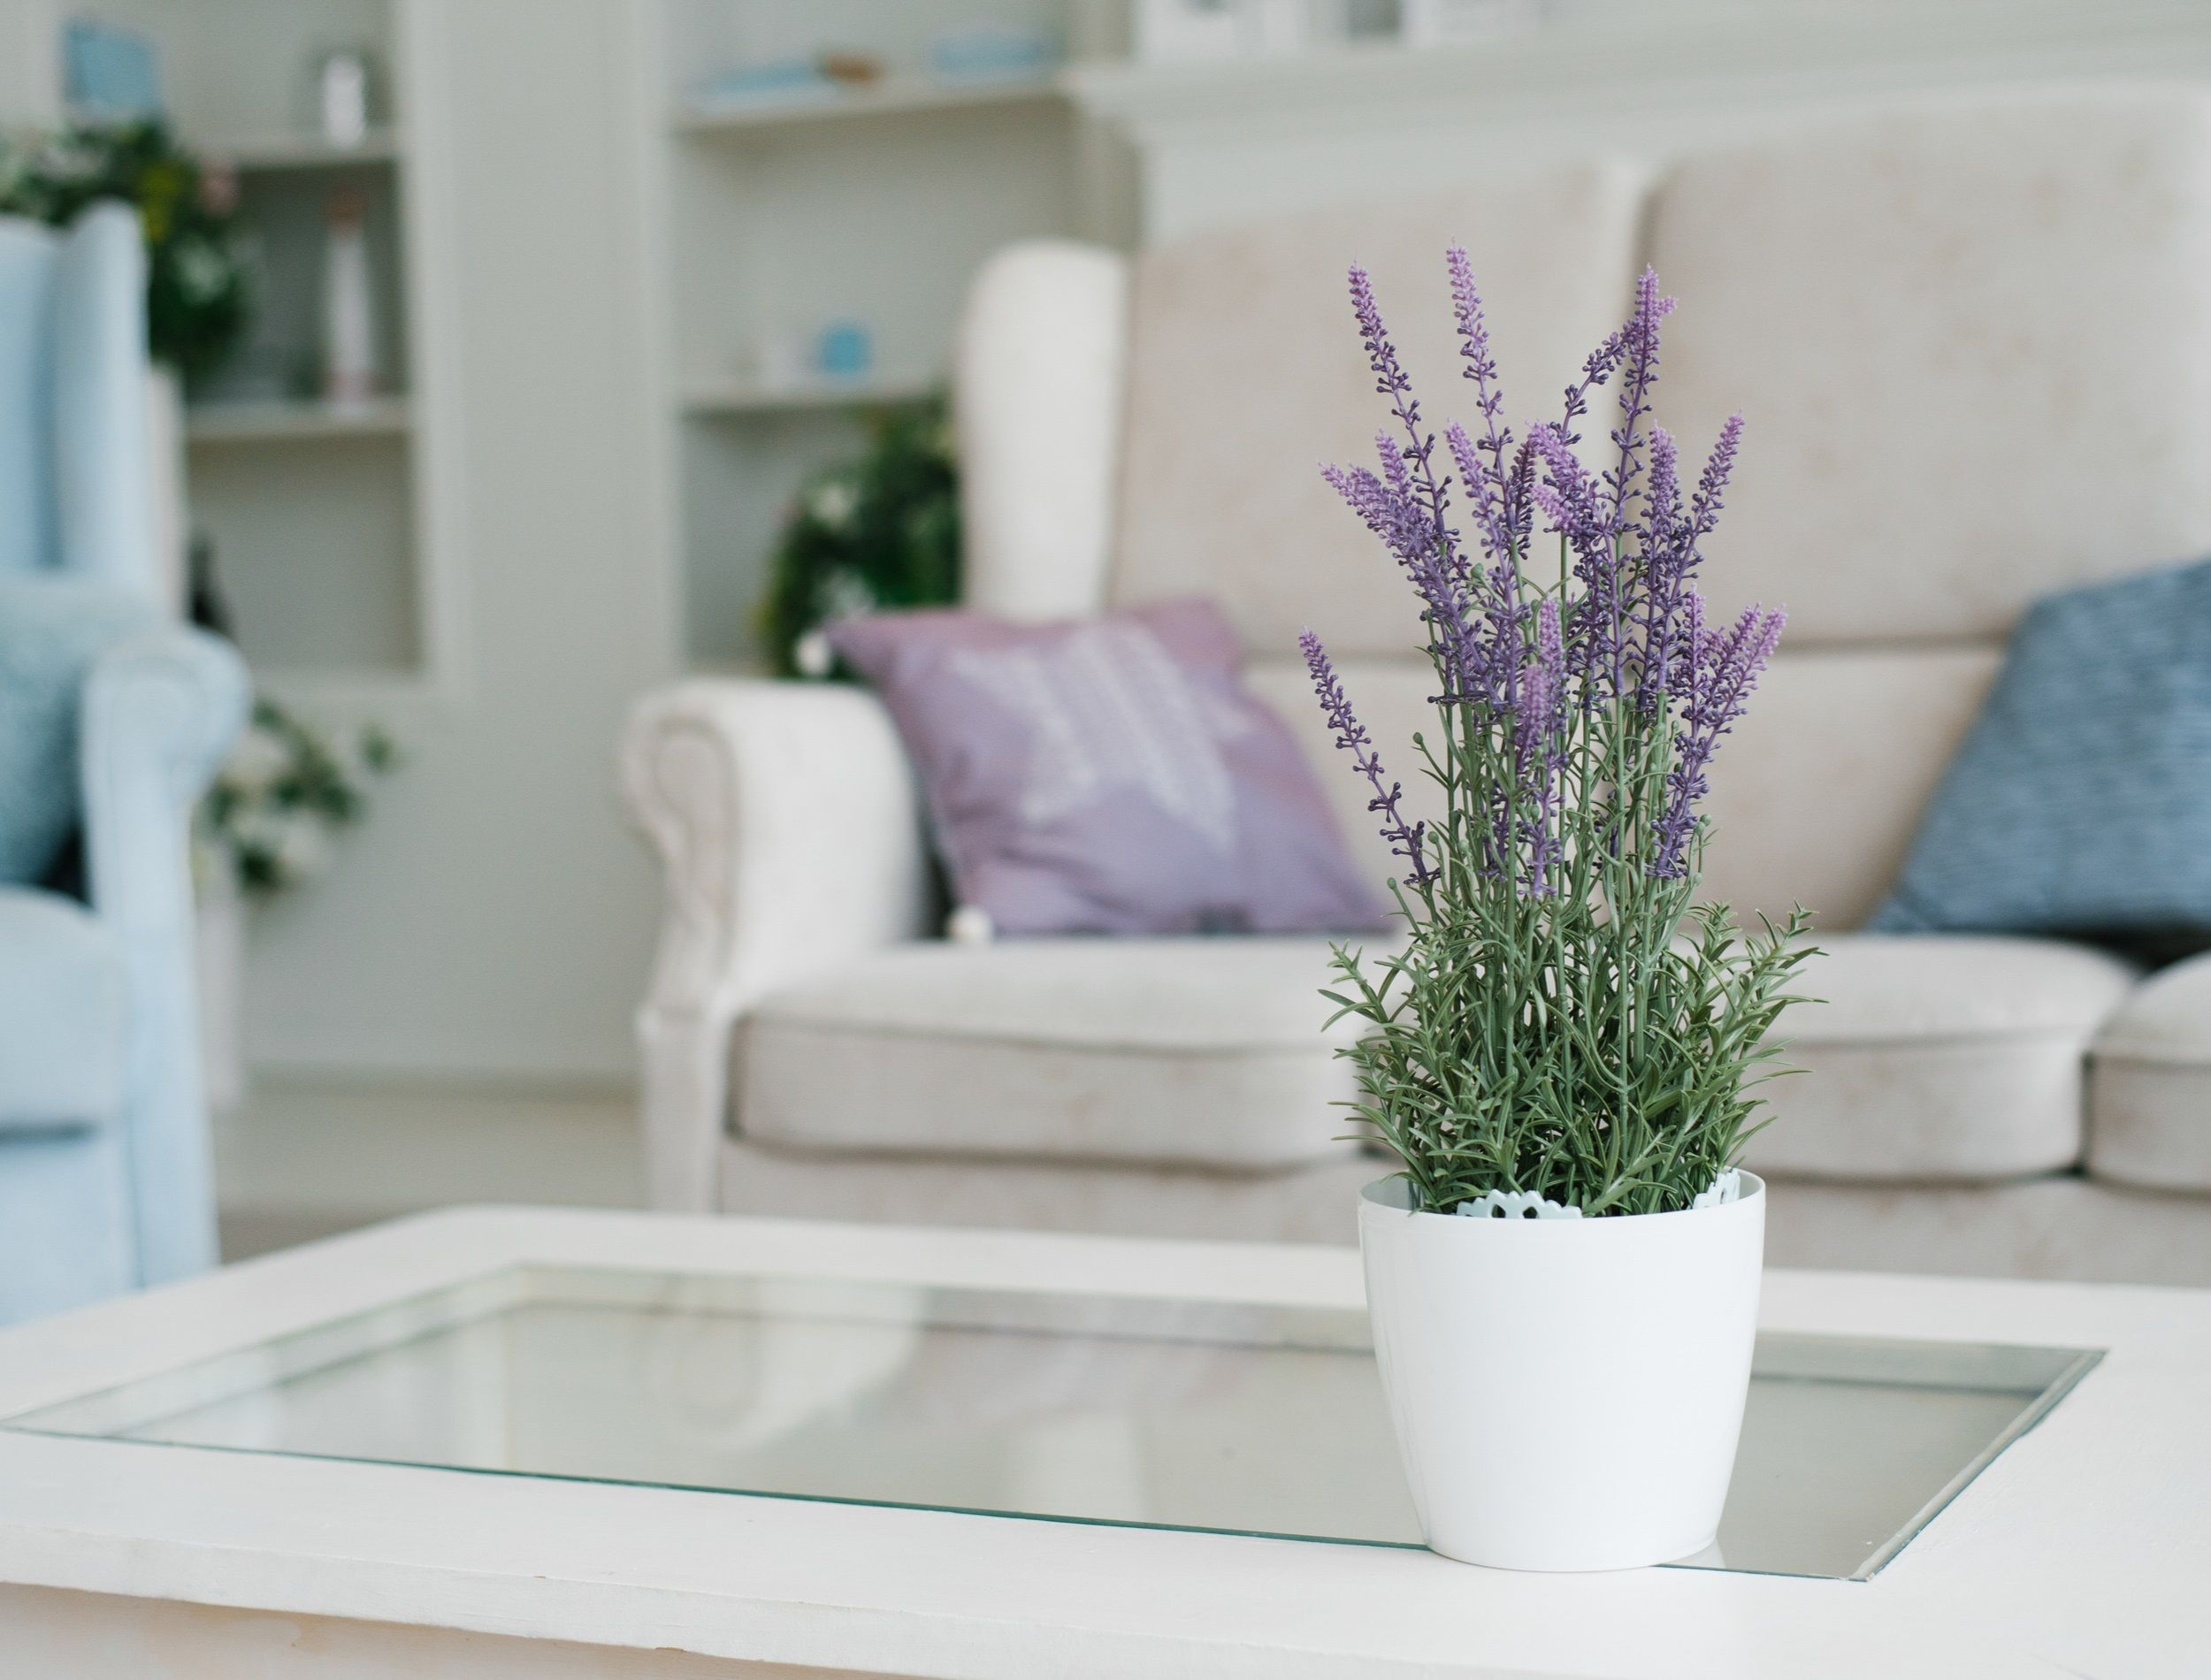 White vase with lavender flowers in the interior decor of the living room in light colors with blue color